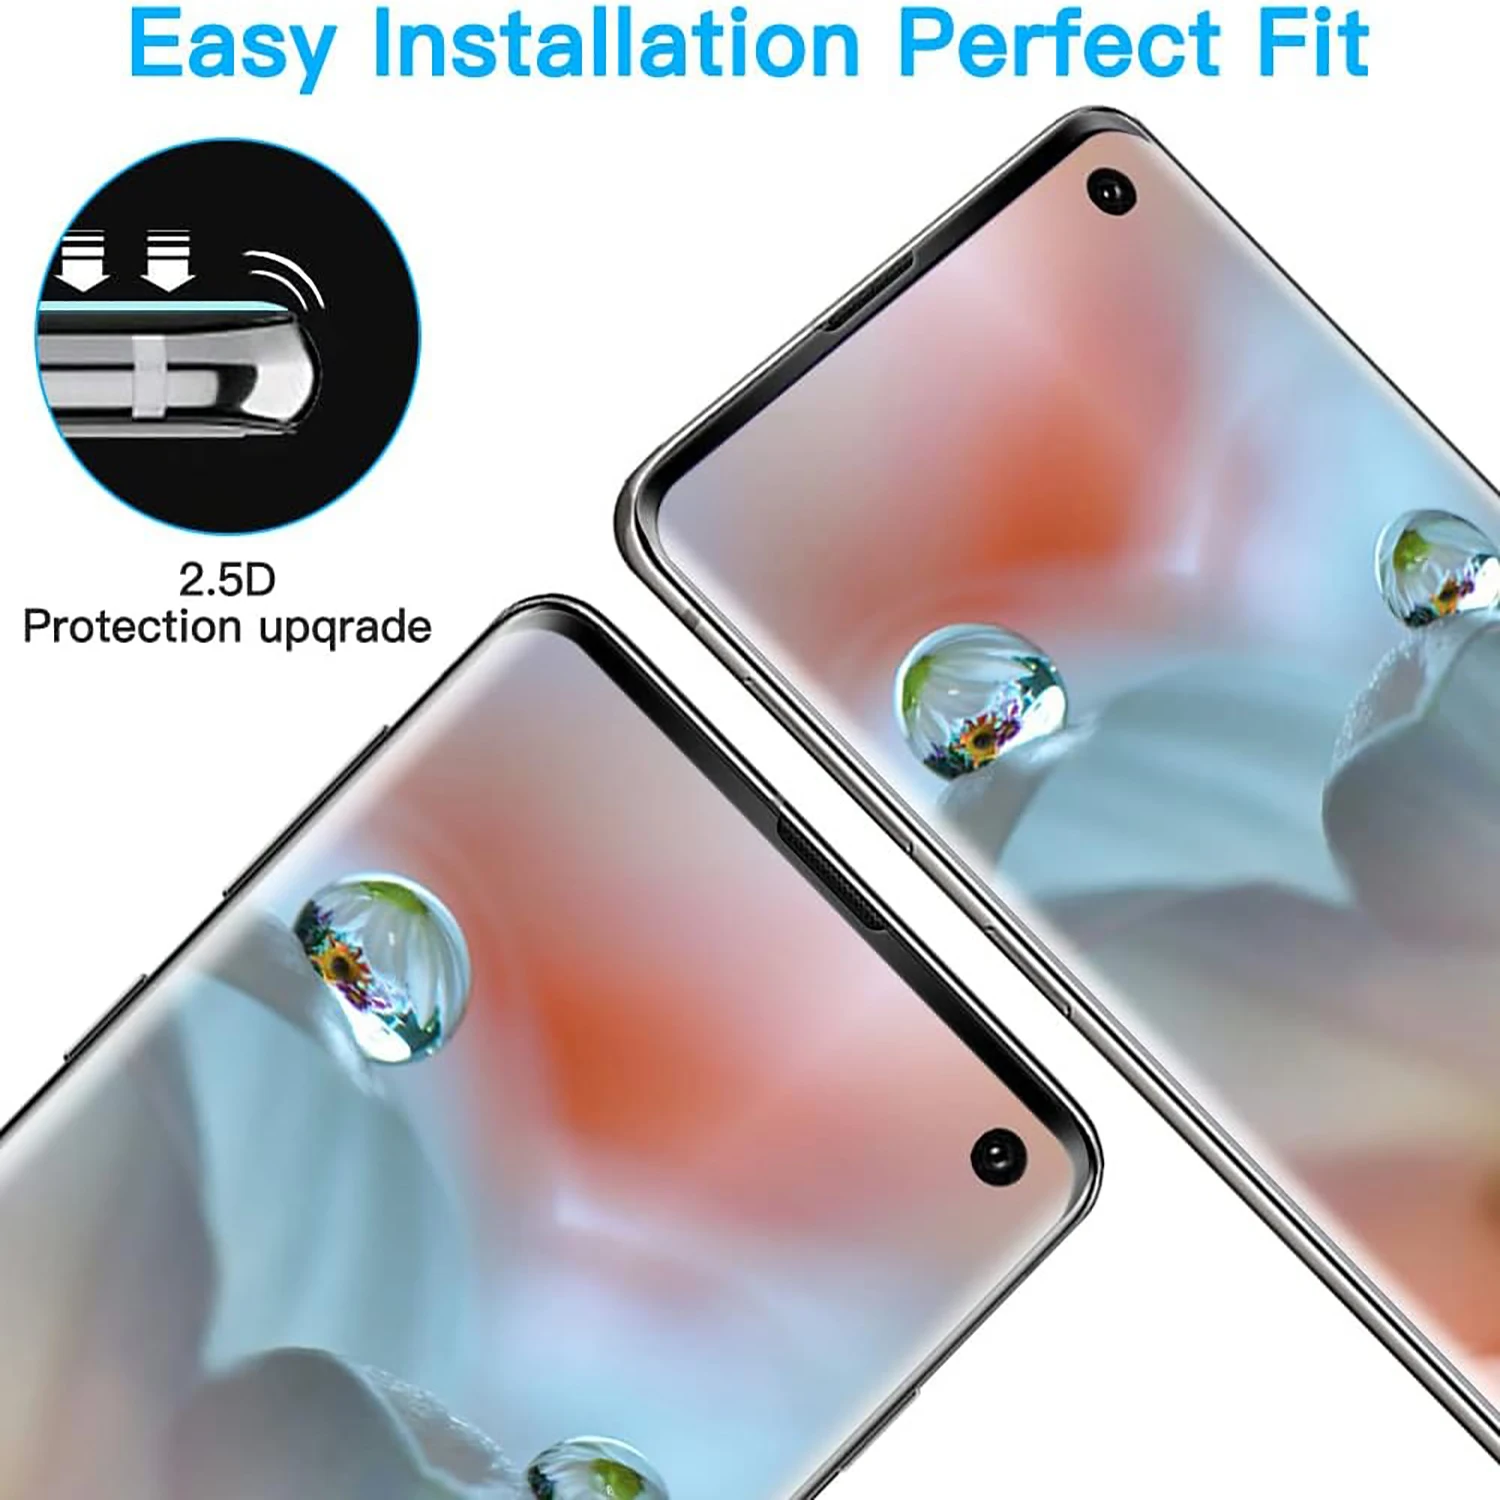 1/4Pcs 3D Screen Protector Glass For Samsung Galaxy S10 S10+ Note 10 Plus Note10+ Tempered Glass Film